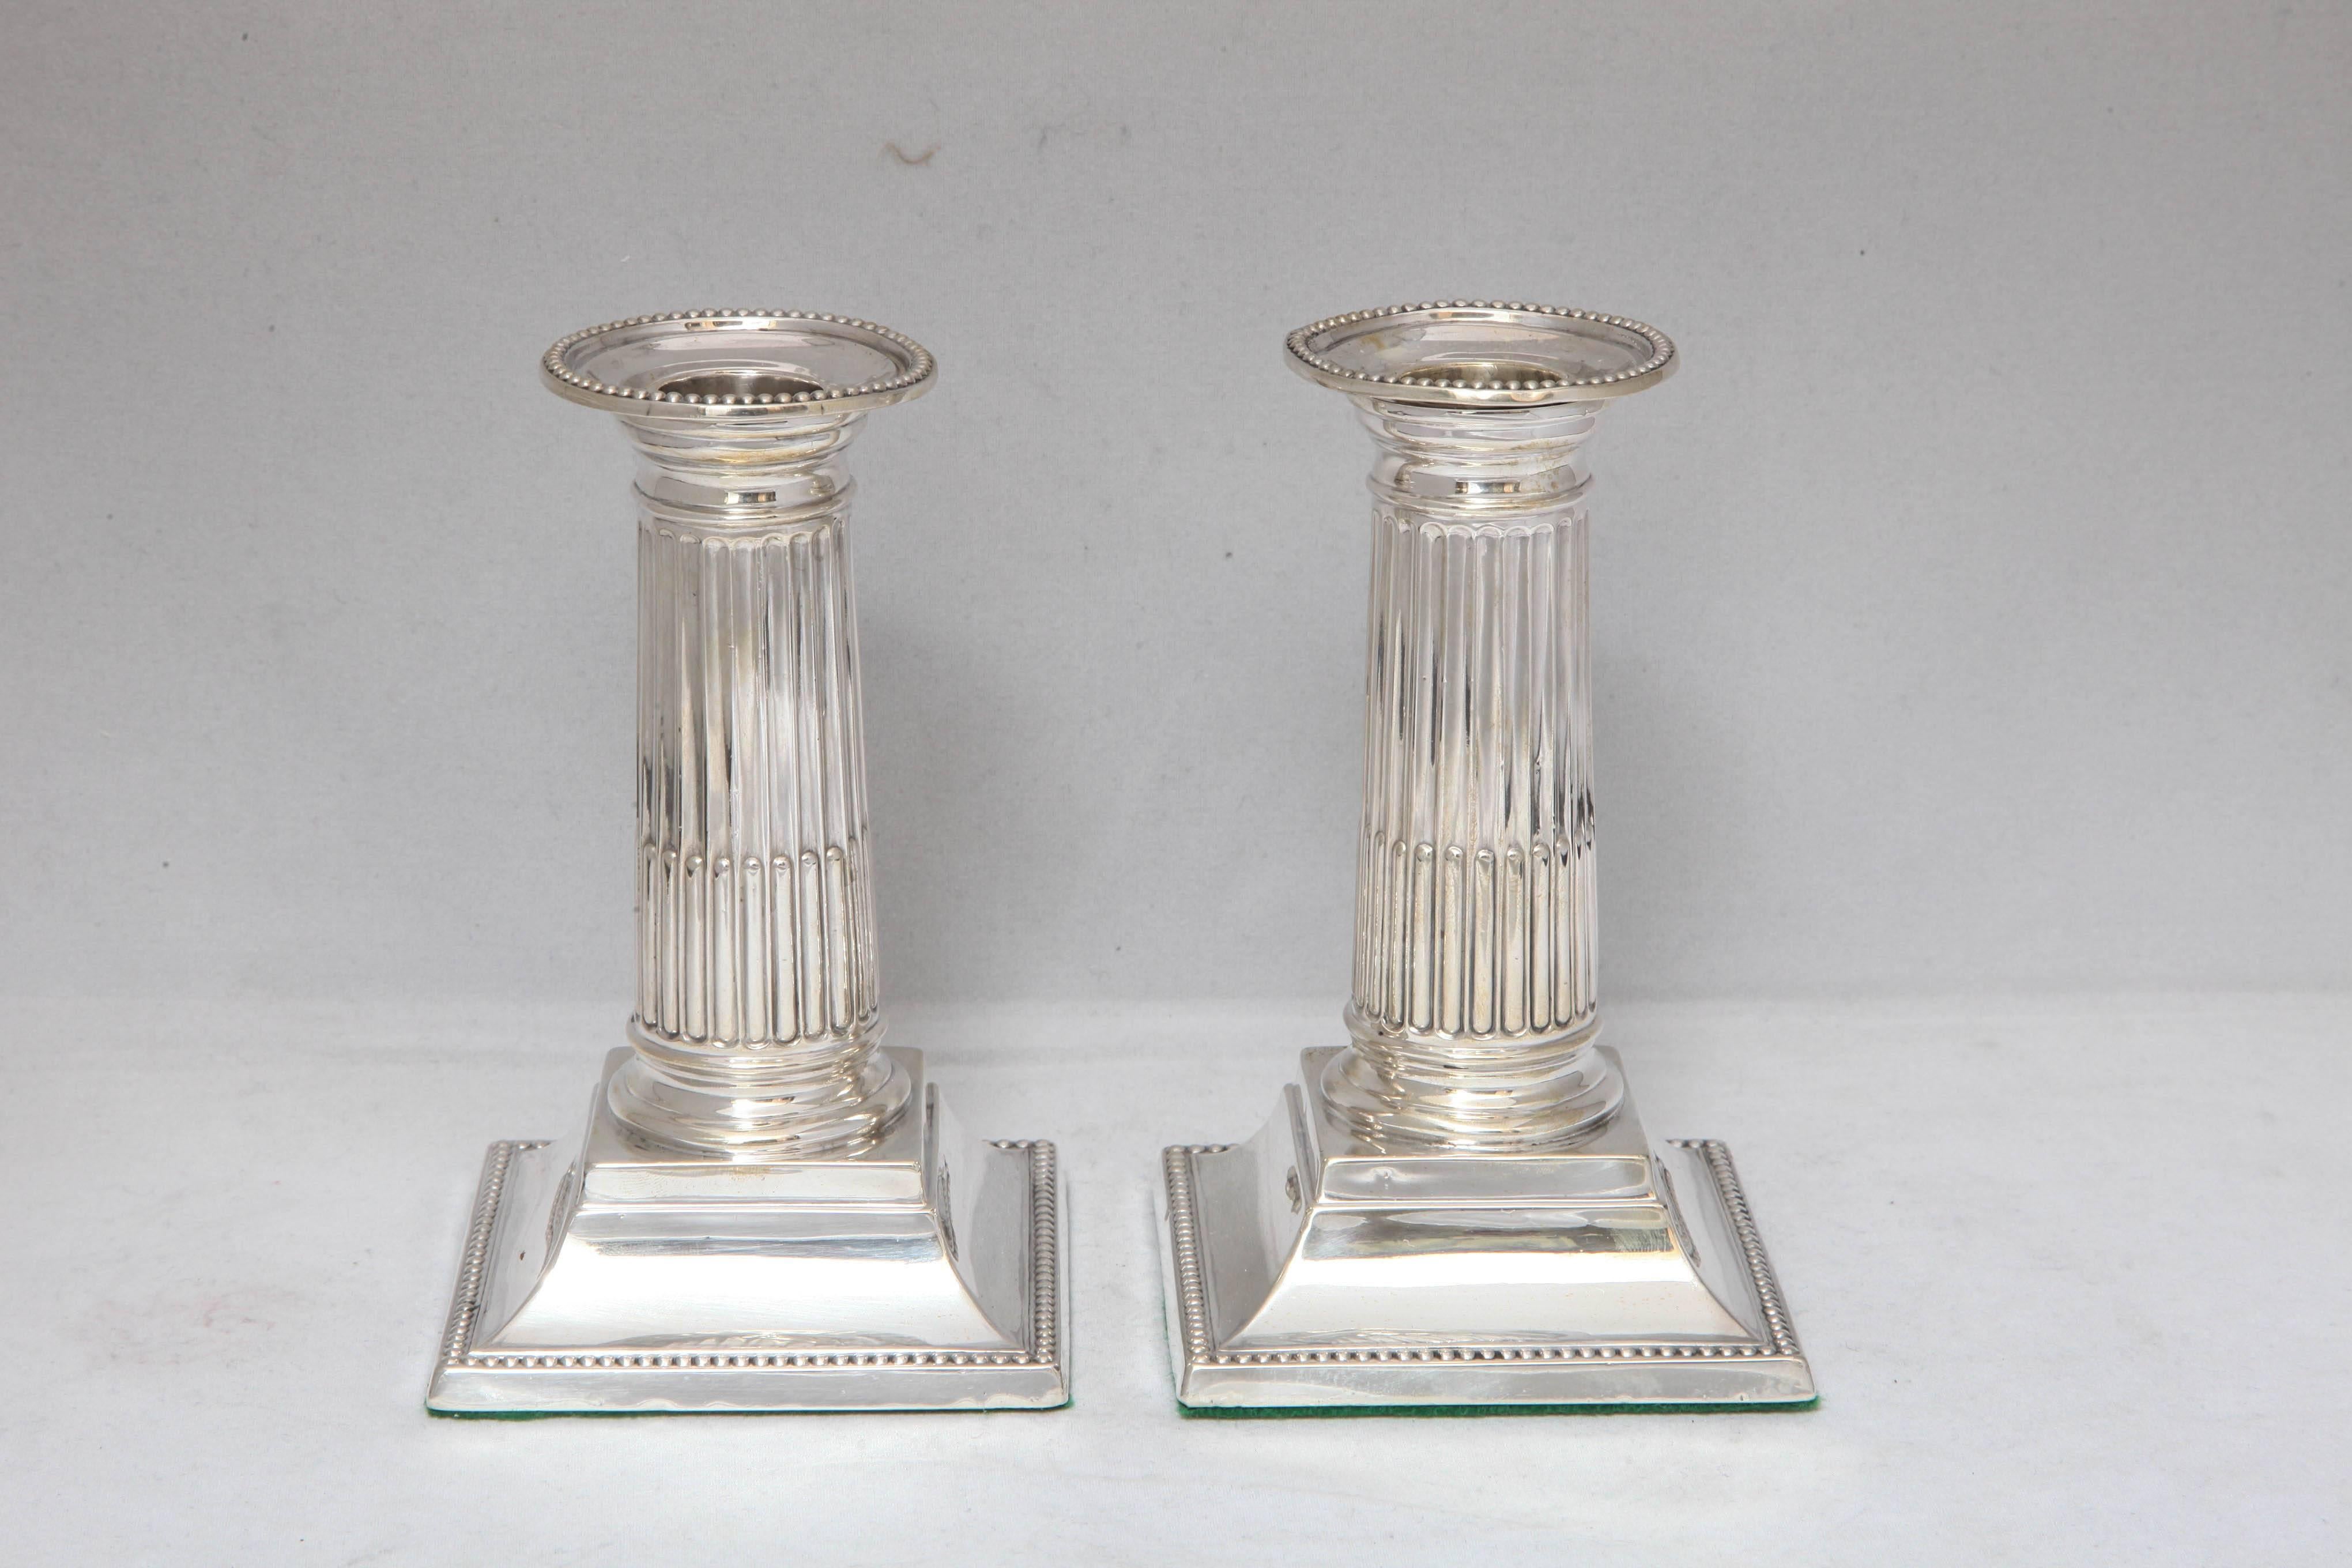 Beautiful pair of Victorian, sterling silver, column form candlesticks, Sheffield, England, 1891, George Heath - maker. Measures: 5 1/2